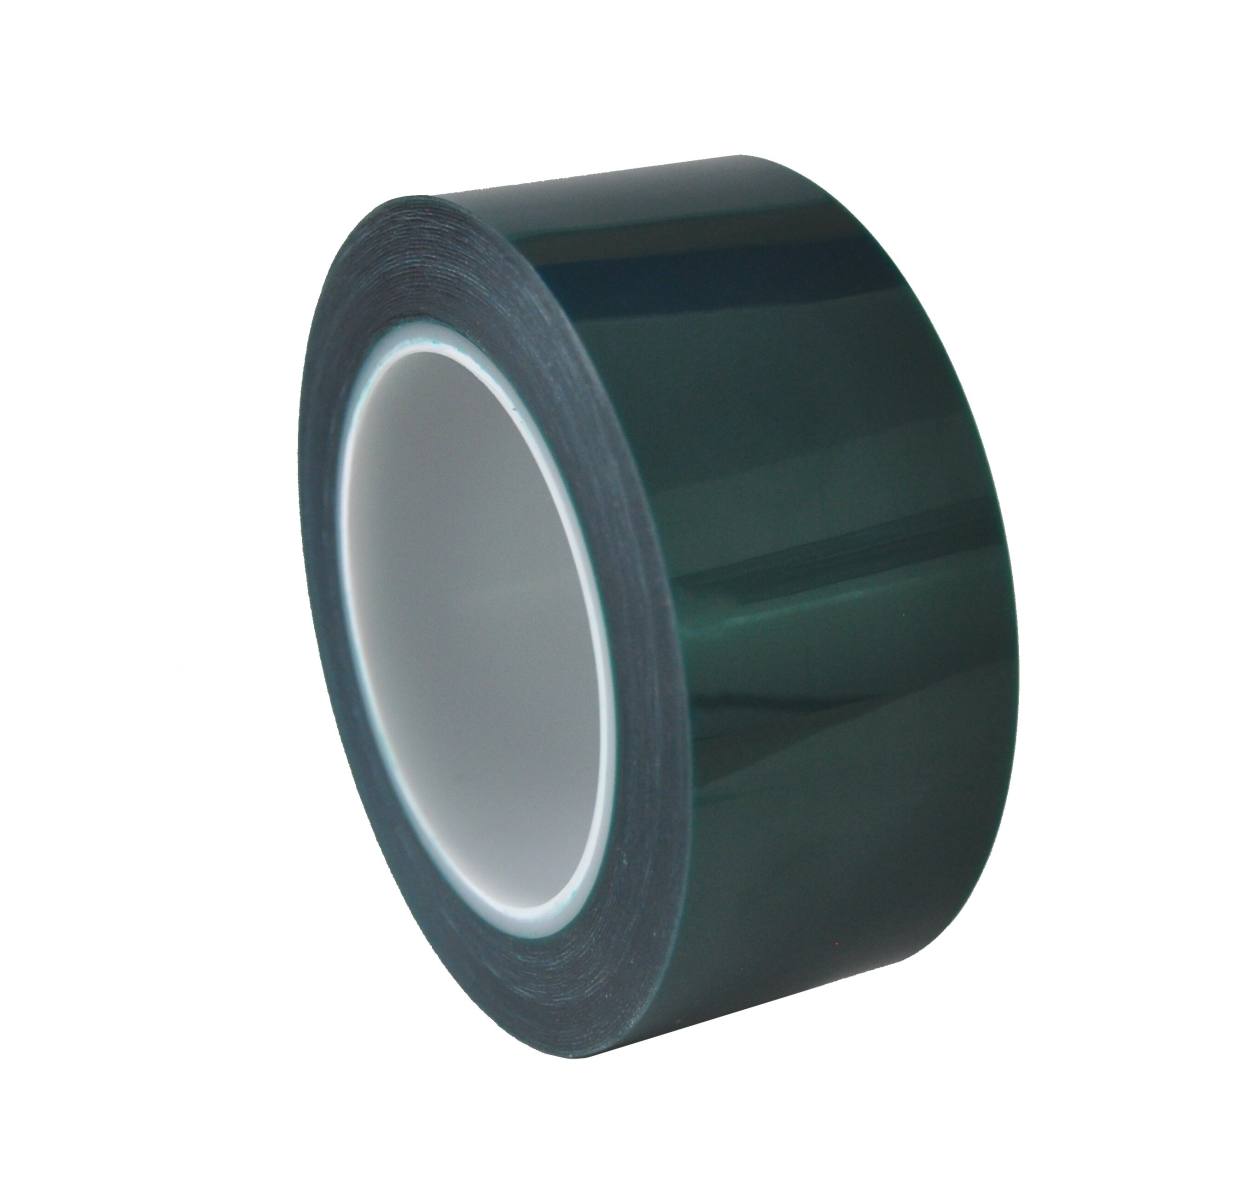 S-K-S 208G polyester adhesive tape, 200mmx66m, green